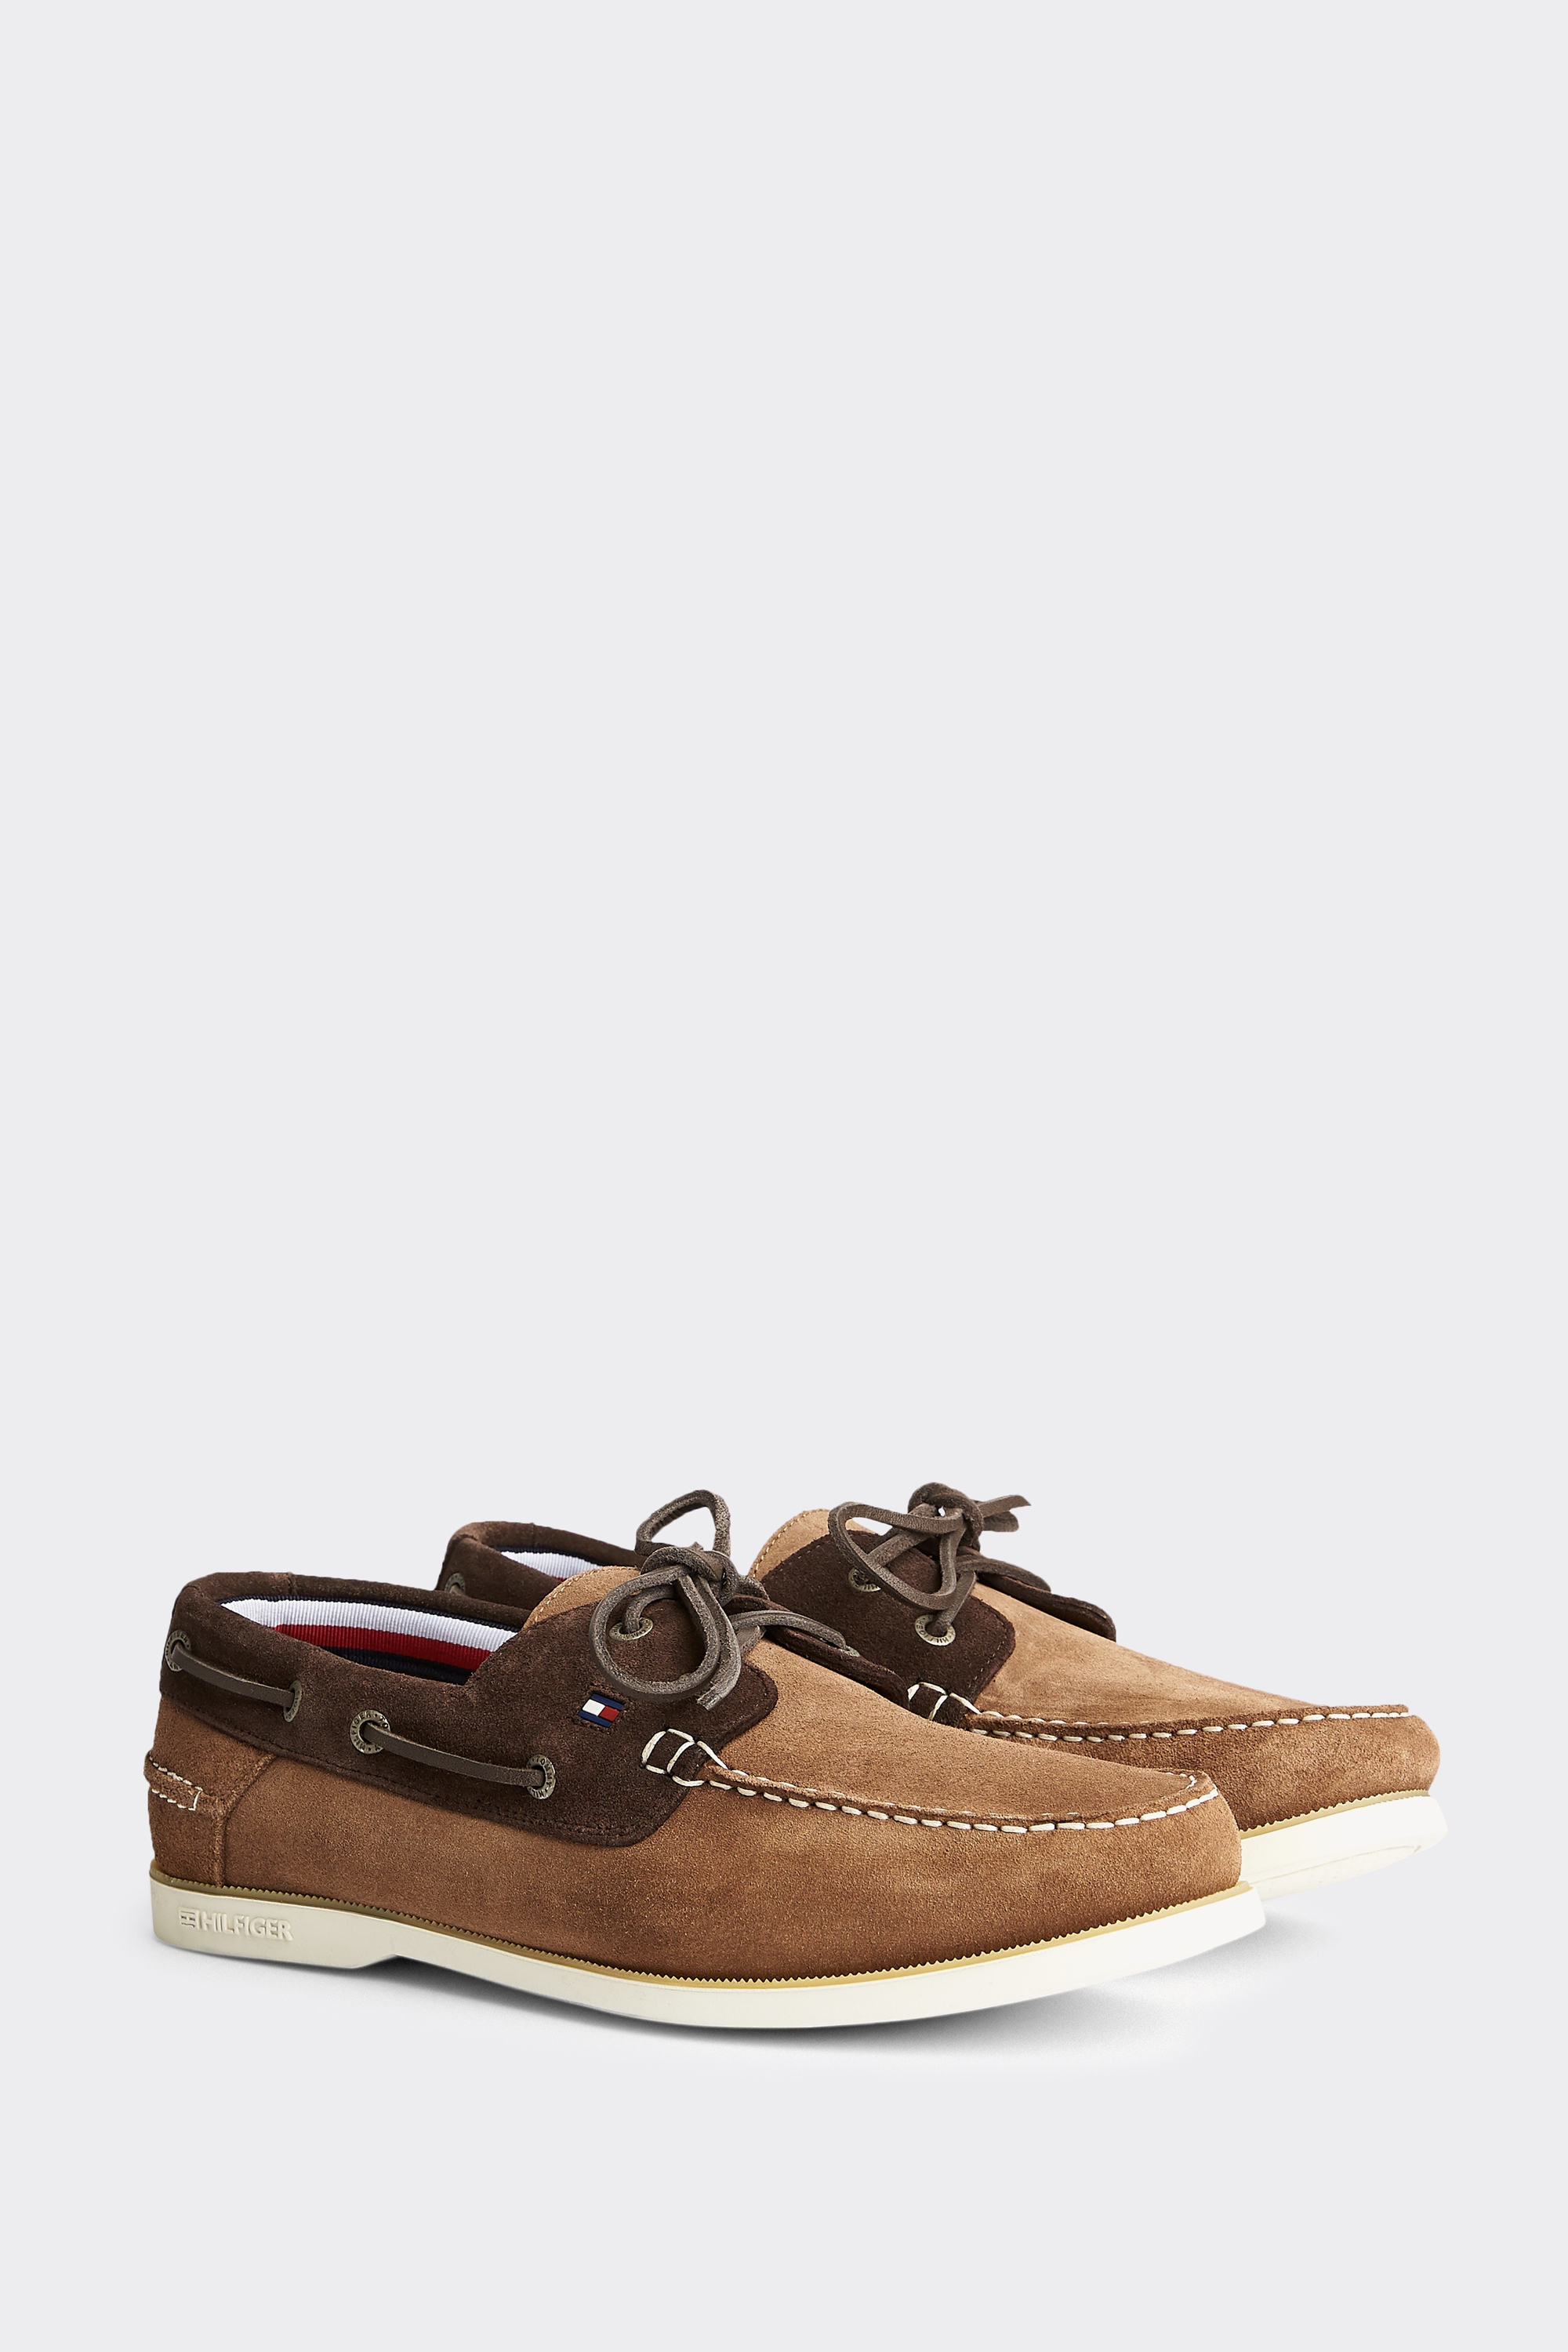 tommy hilfiger classic suede boat shoes